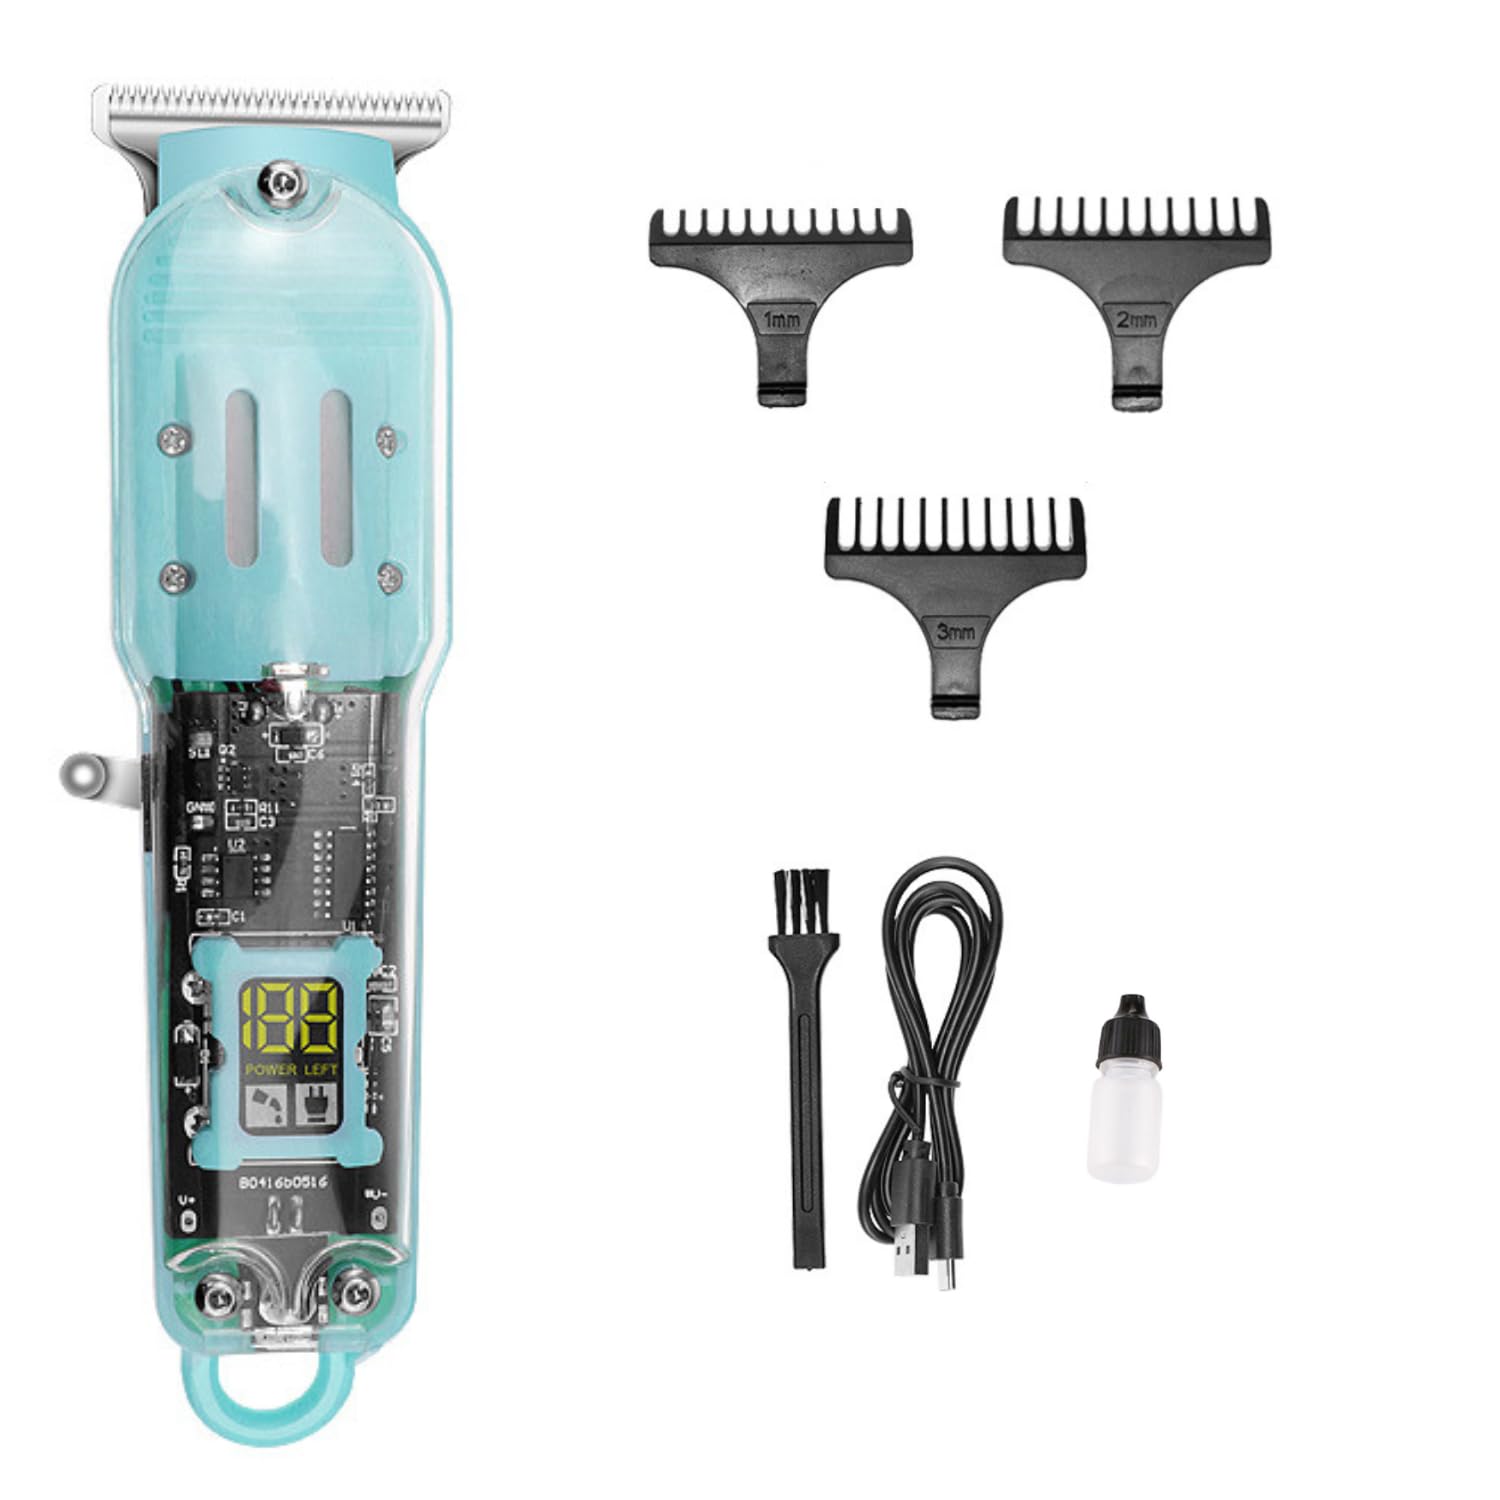 SkyShopy Pro Li Outliner Cordless T Blade Hair Clipper Professional 0 Gapped Outlining for Barbers 0mm balding Shape up Digital Display 3 guide comb Powerful Rotary Motor Runtime 180 min